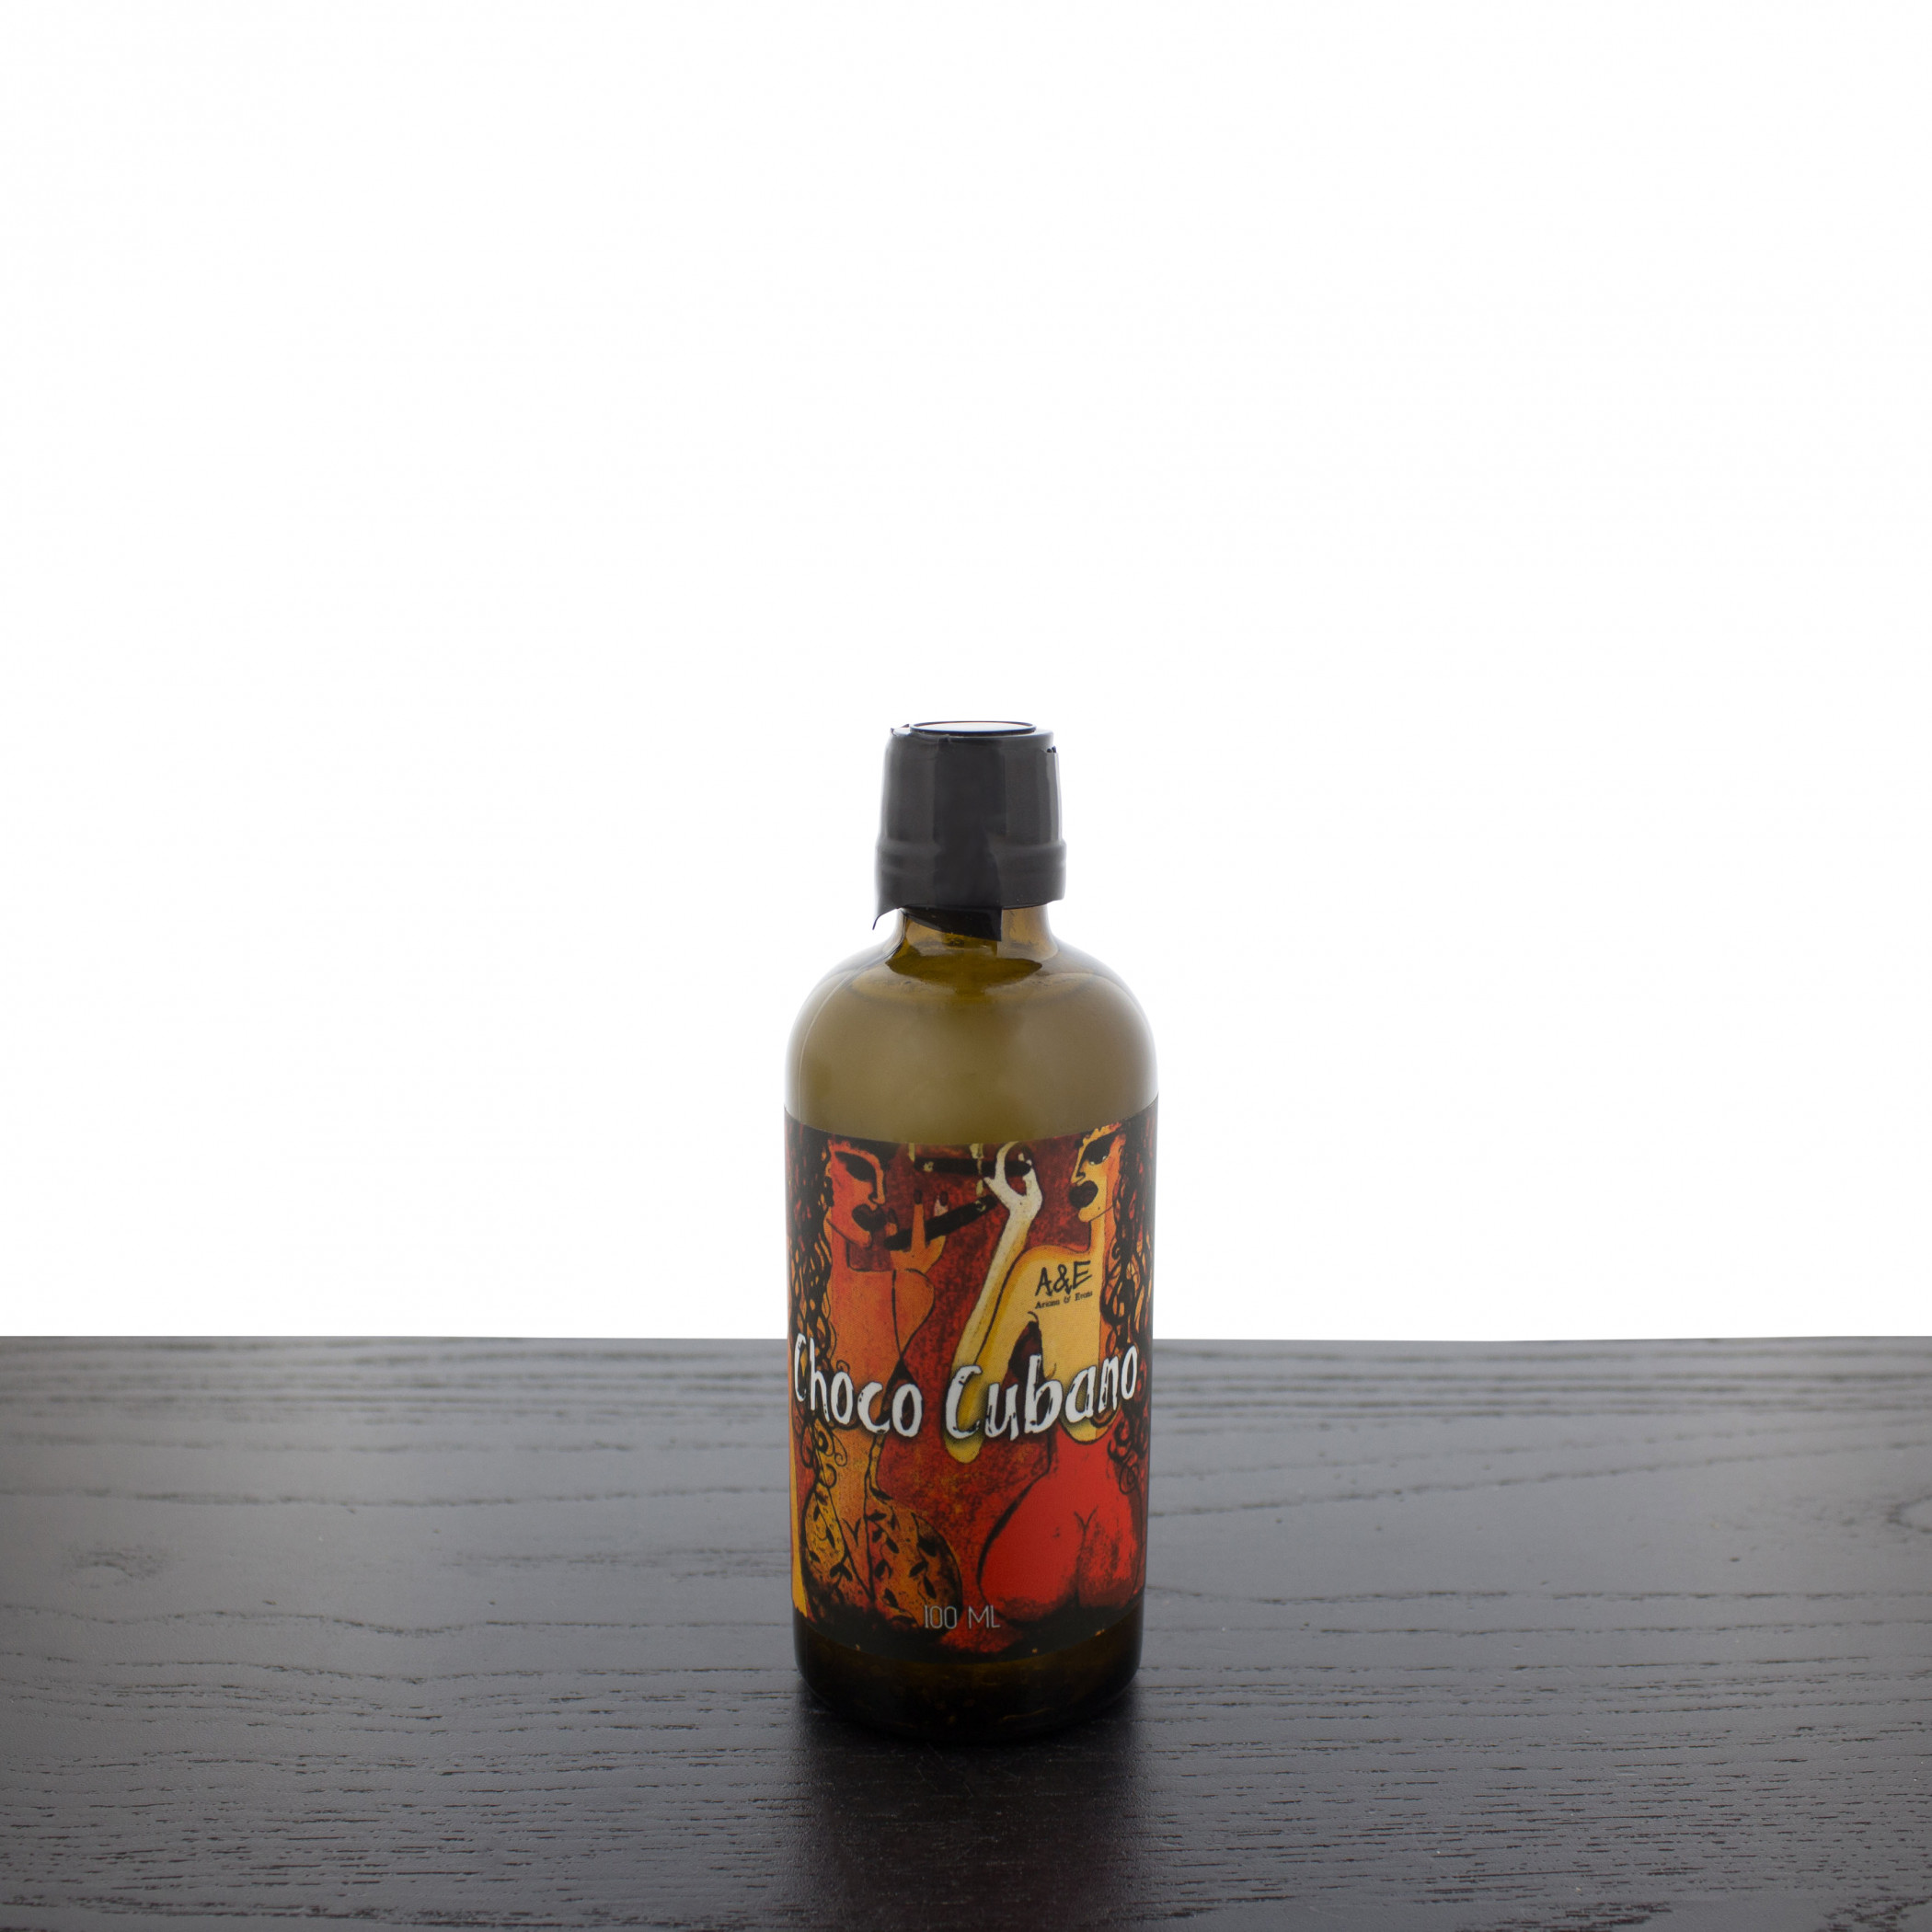 Product image 0 for Ariana & Evans After Shave Splash, Choco Cubano